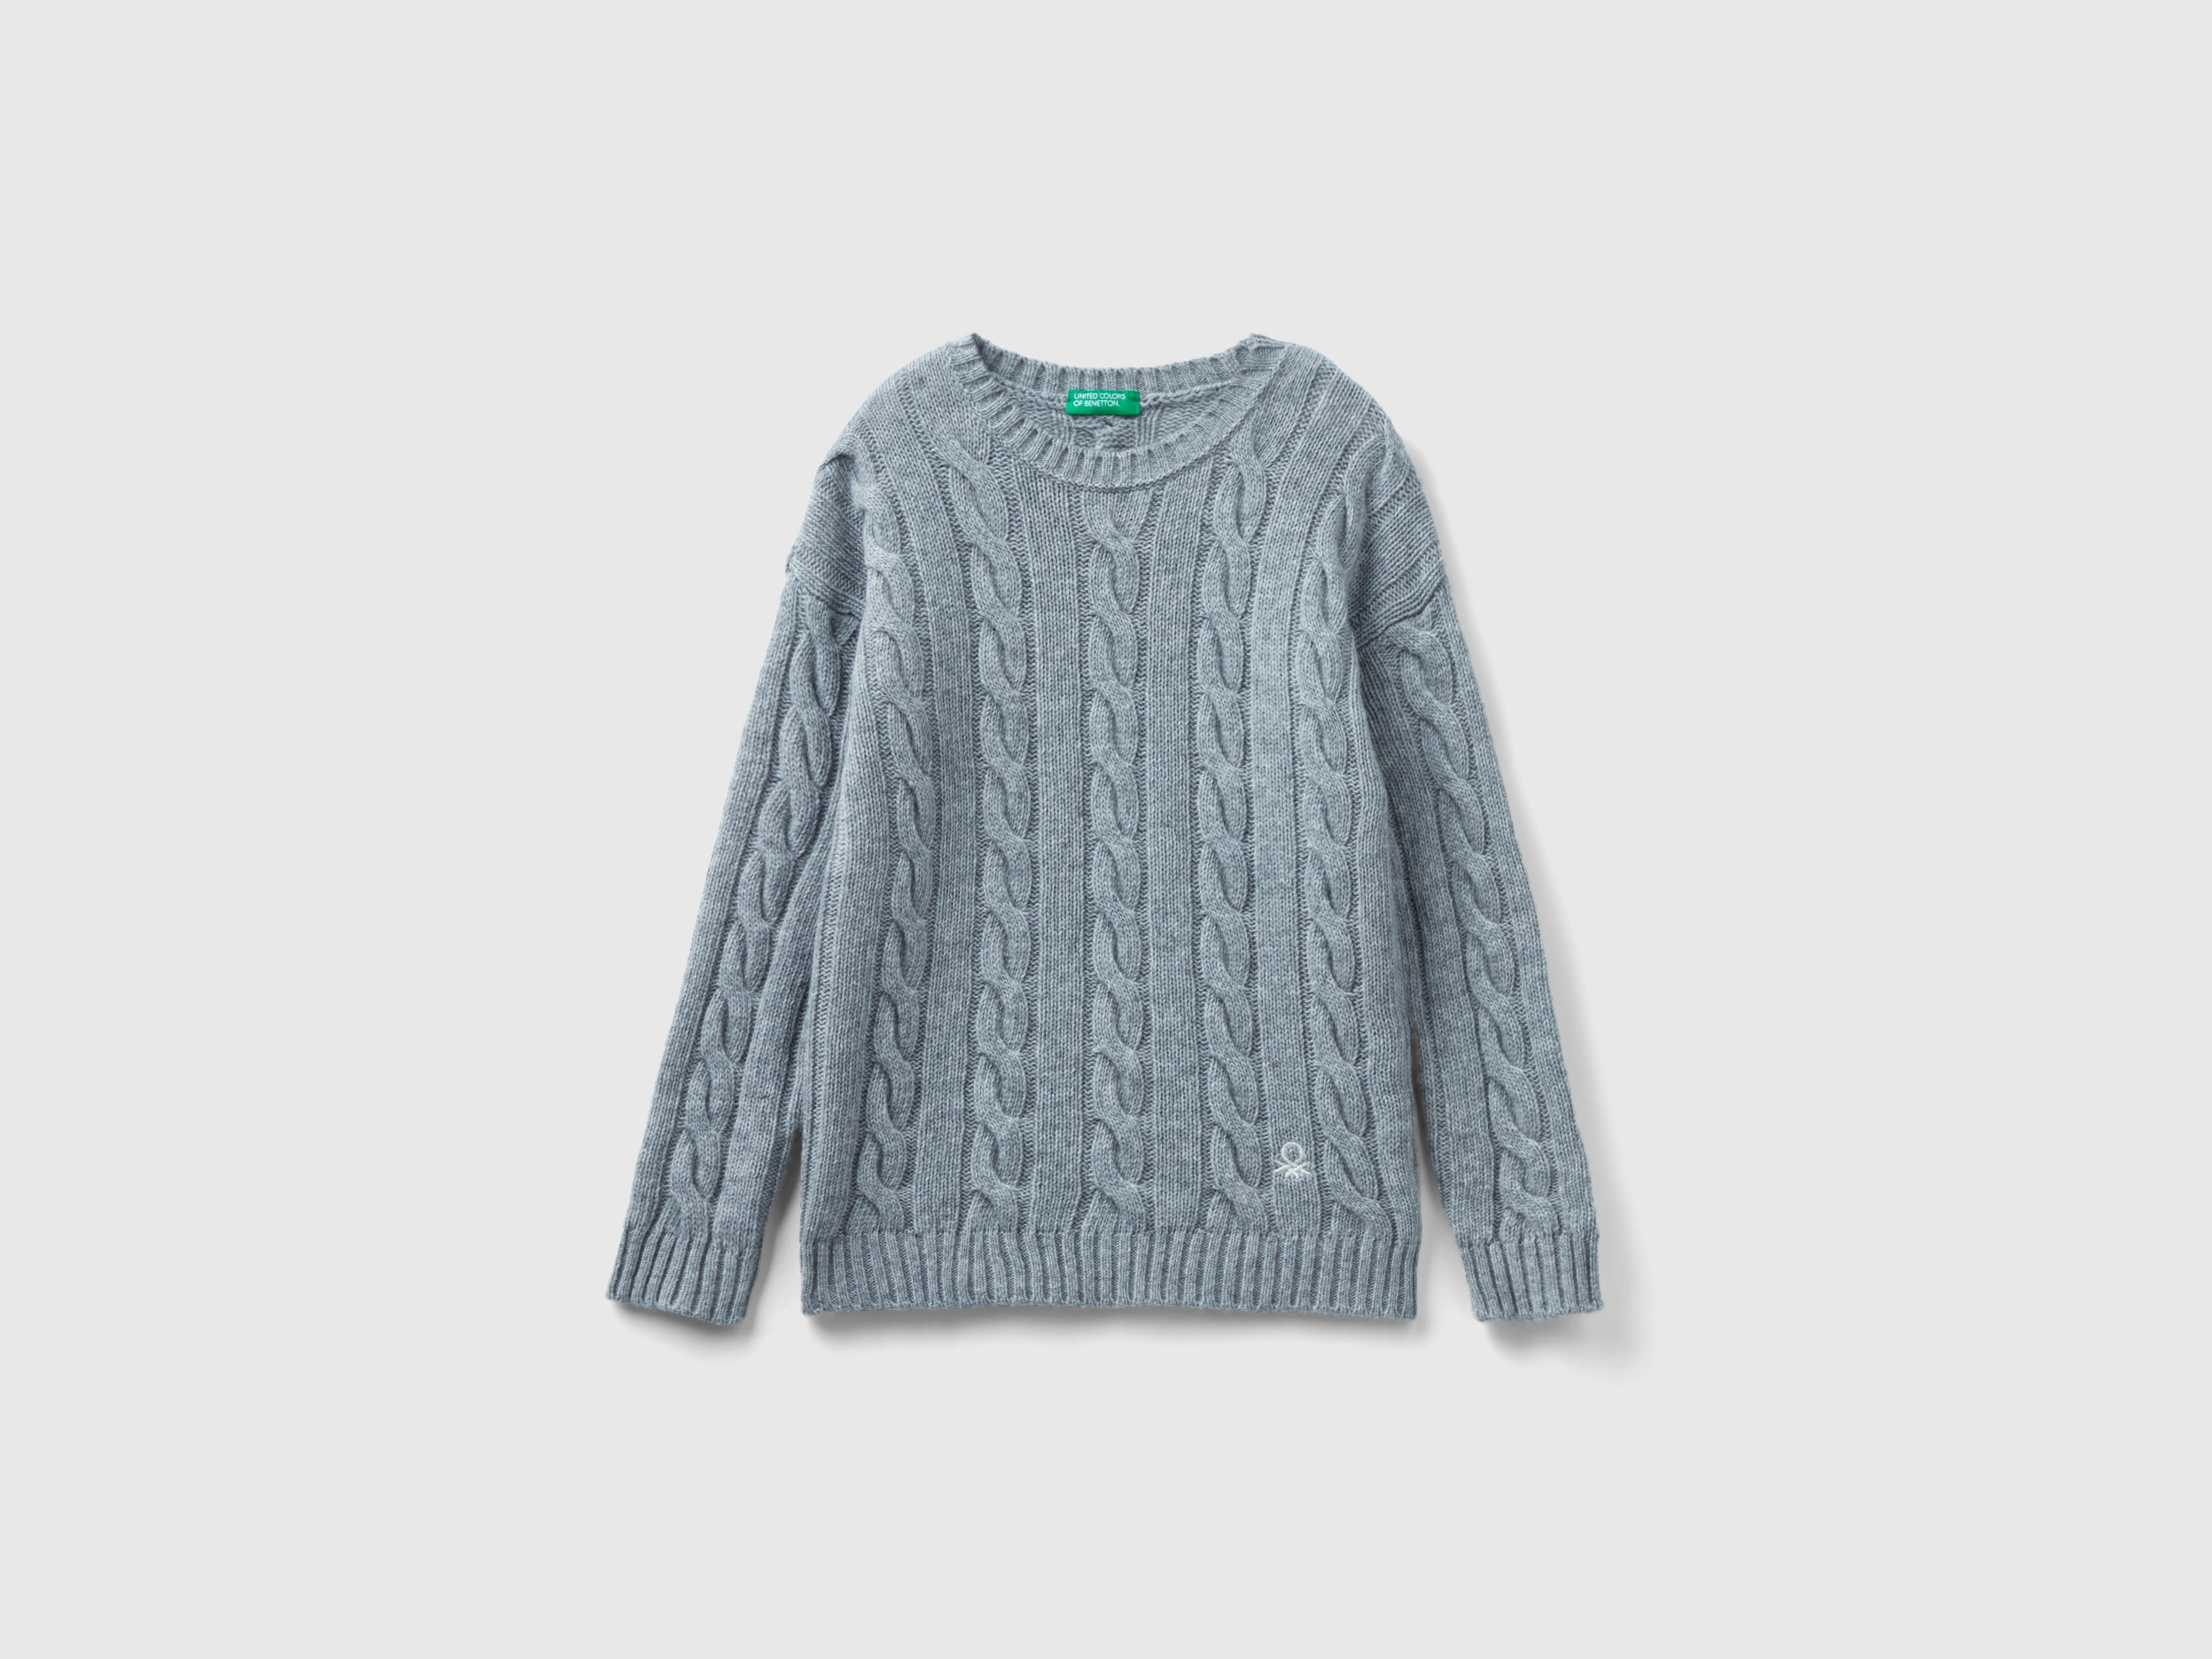 Benetton, Cable Knit Sweater In Wool Blend, size S, Gray, Kids